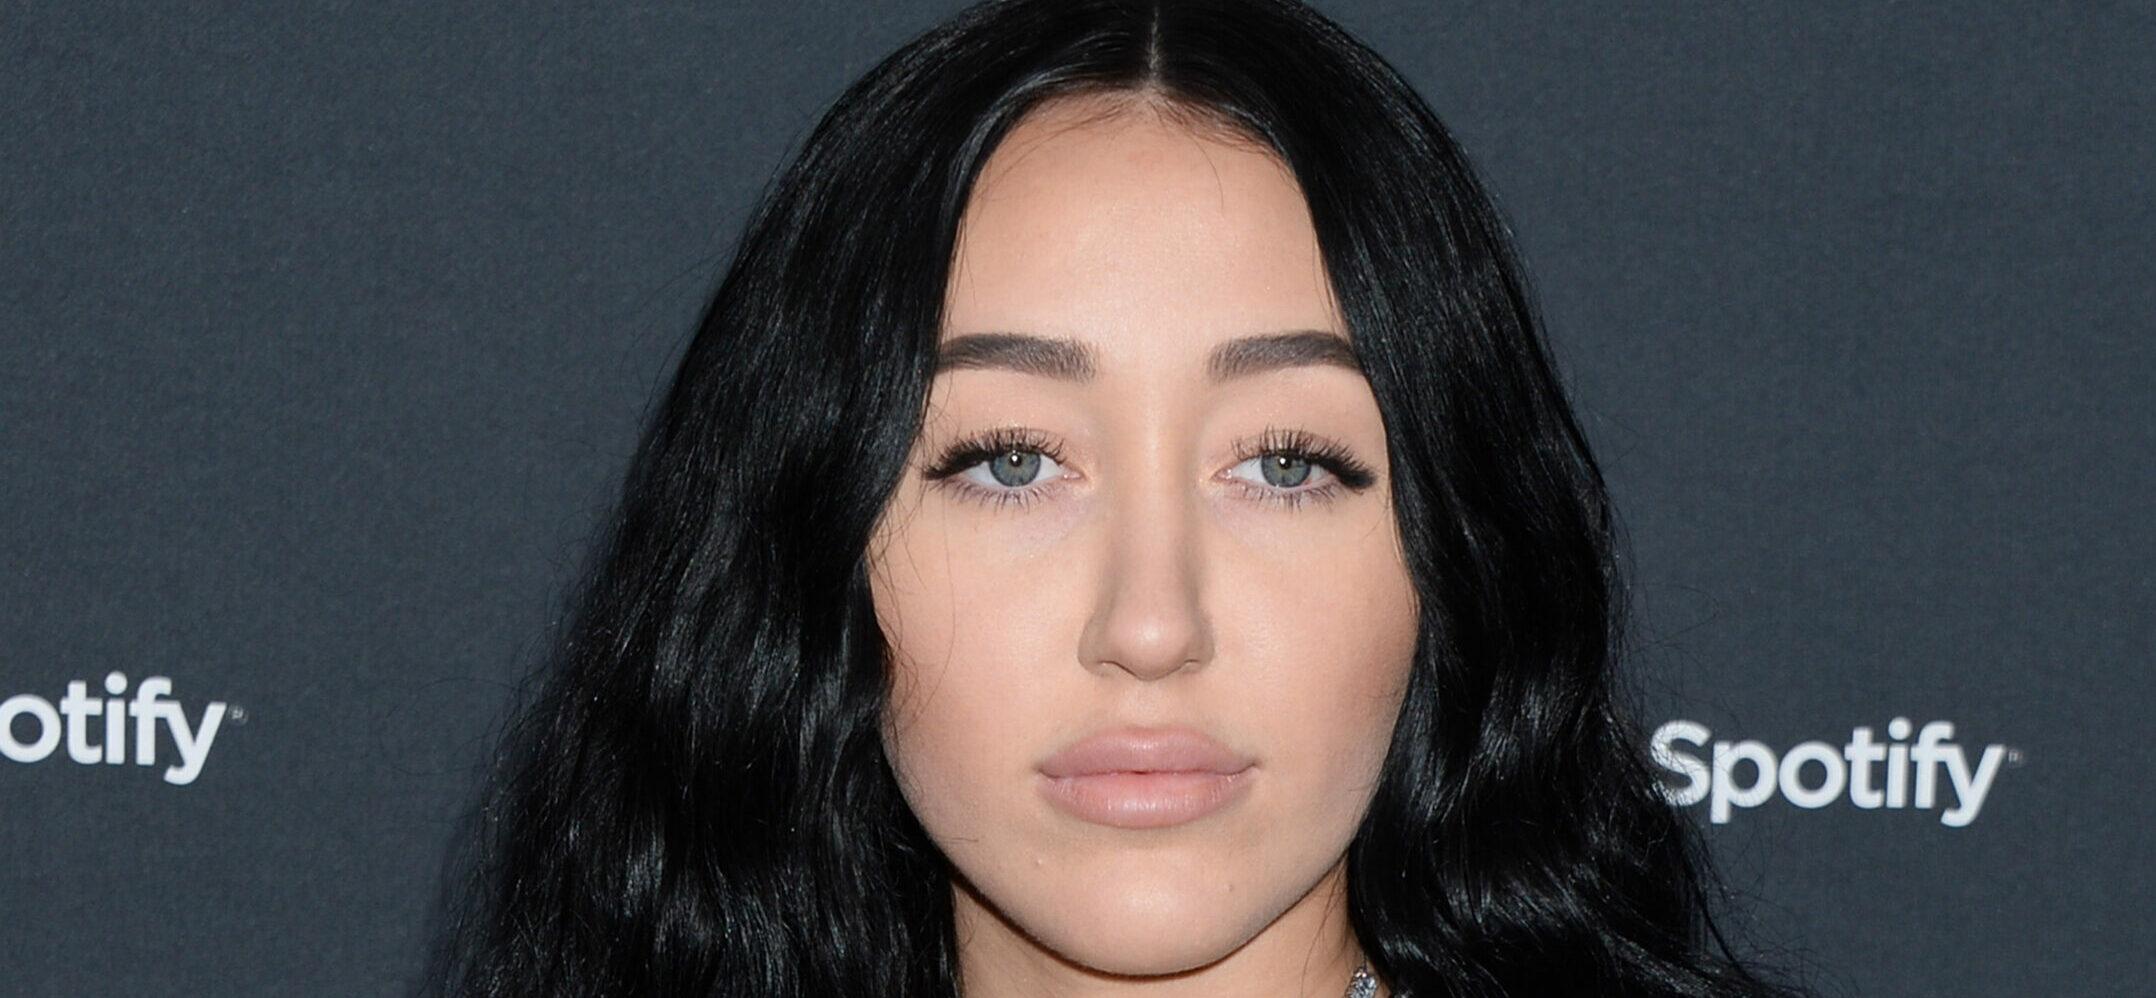 Noah Cyrus ALARMS Fans With Emotional Video About Dad, Billy Ray Cyrus